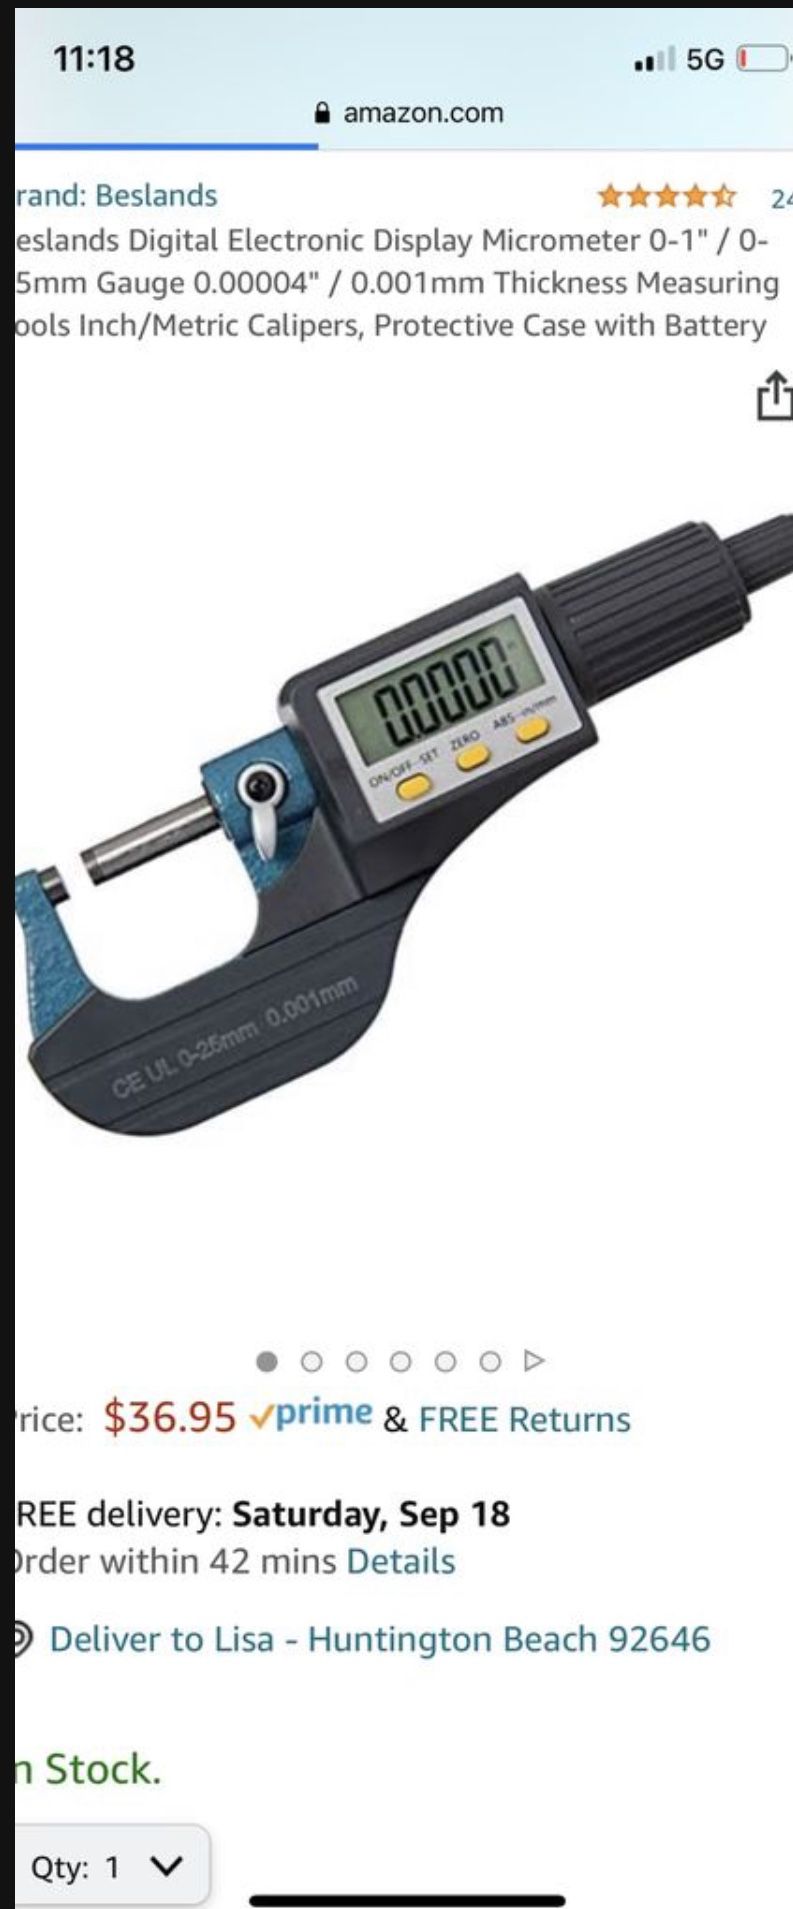 0-25mm Gauge 0.00004 with Extra Battery Beslands Digital Electronic Display Micrometer 0-1 0.001mm Thickness Measuring Tools Inch/Metric Caliper Protective Case 